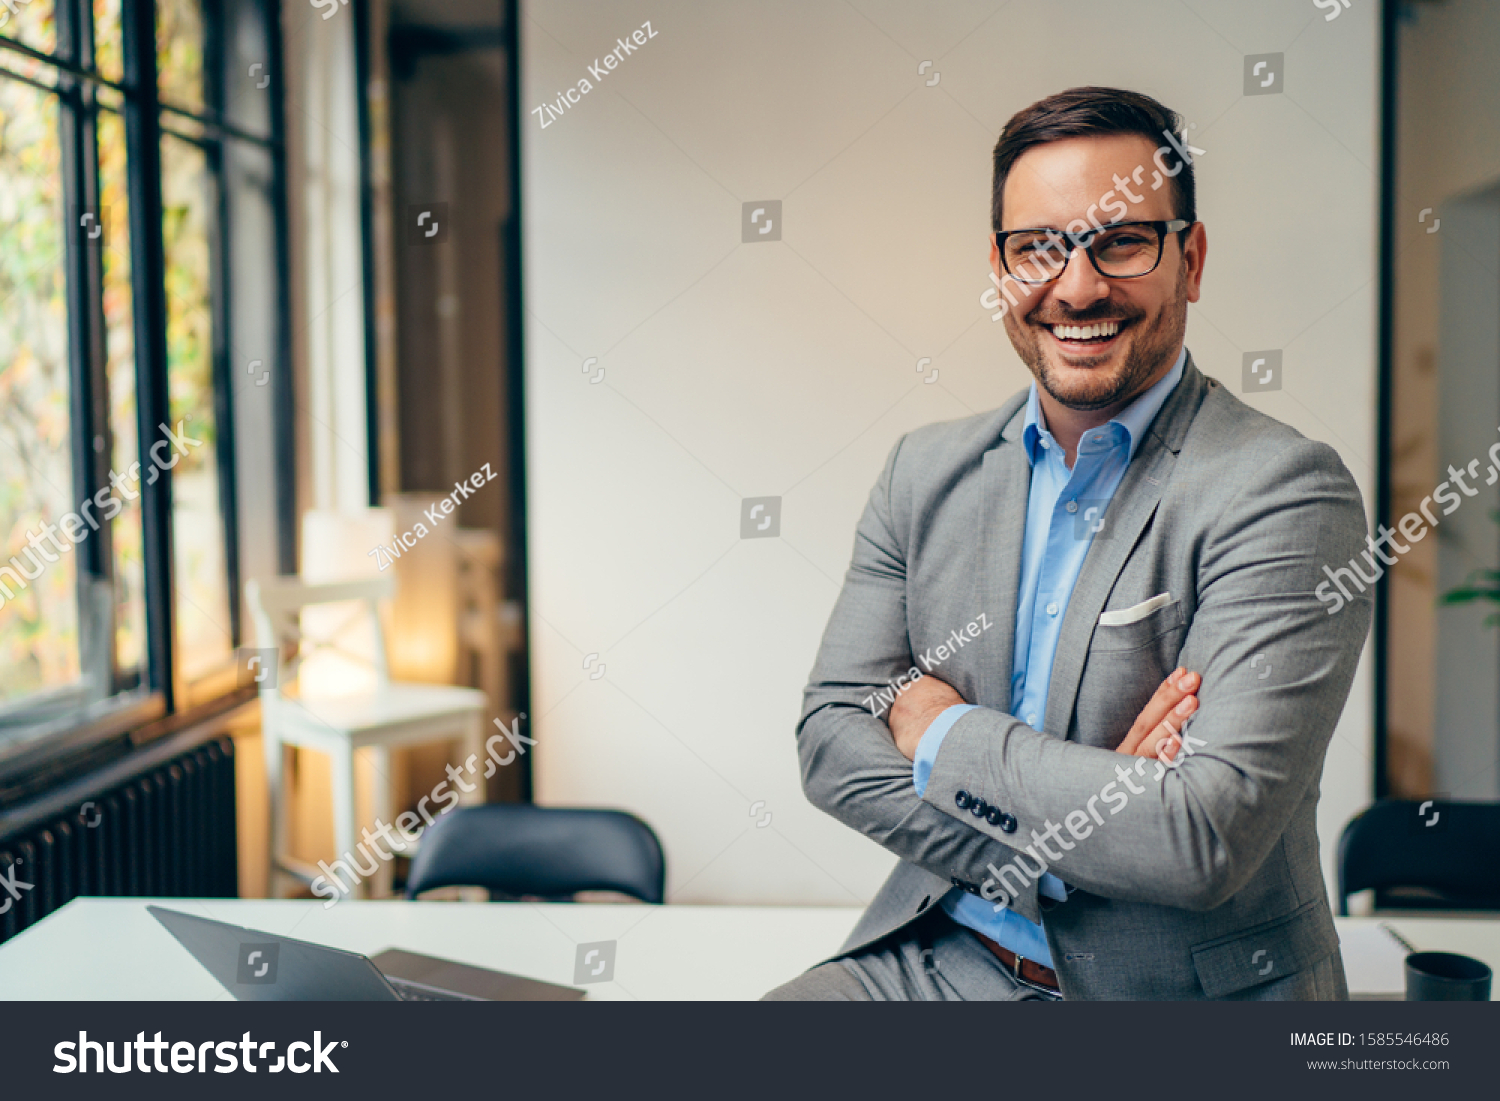 Portrait of young happy businessman wearing grey suit and blue shirt standing in his office and smiling with arms crossed #1585546486